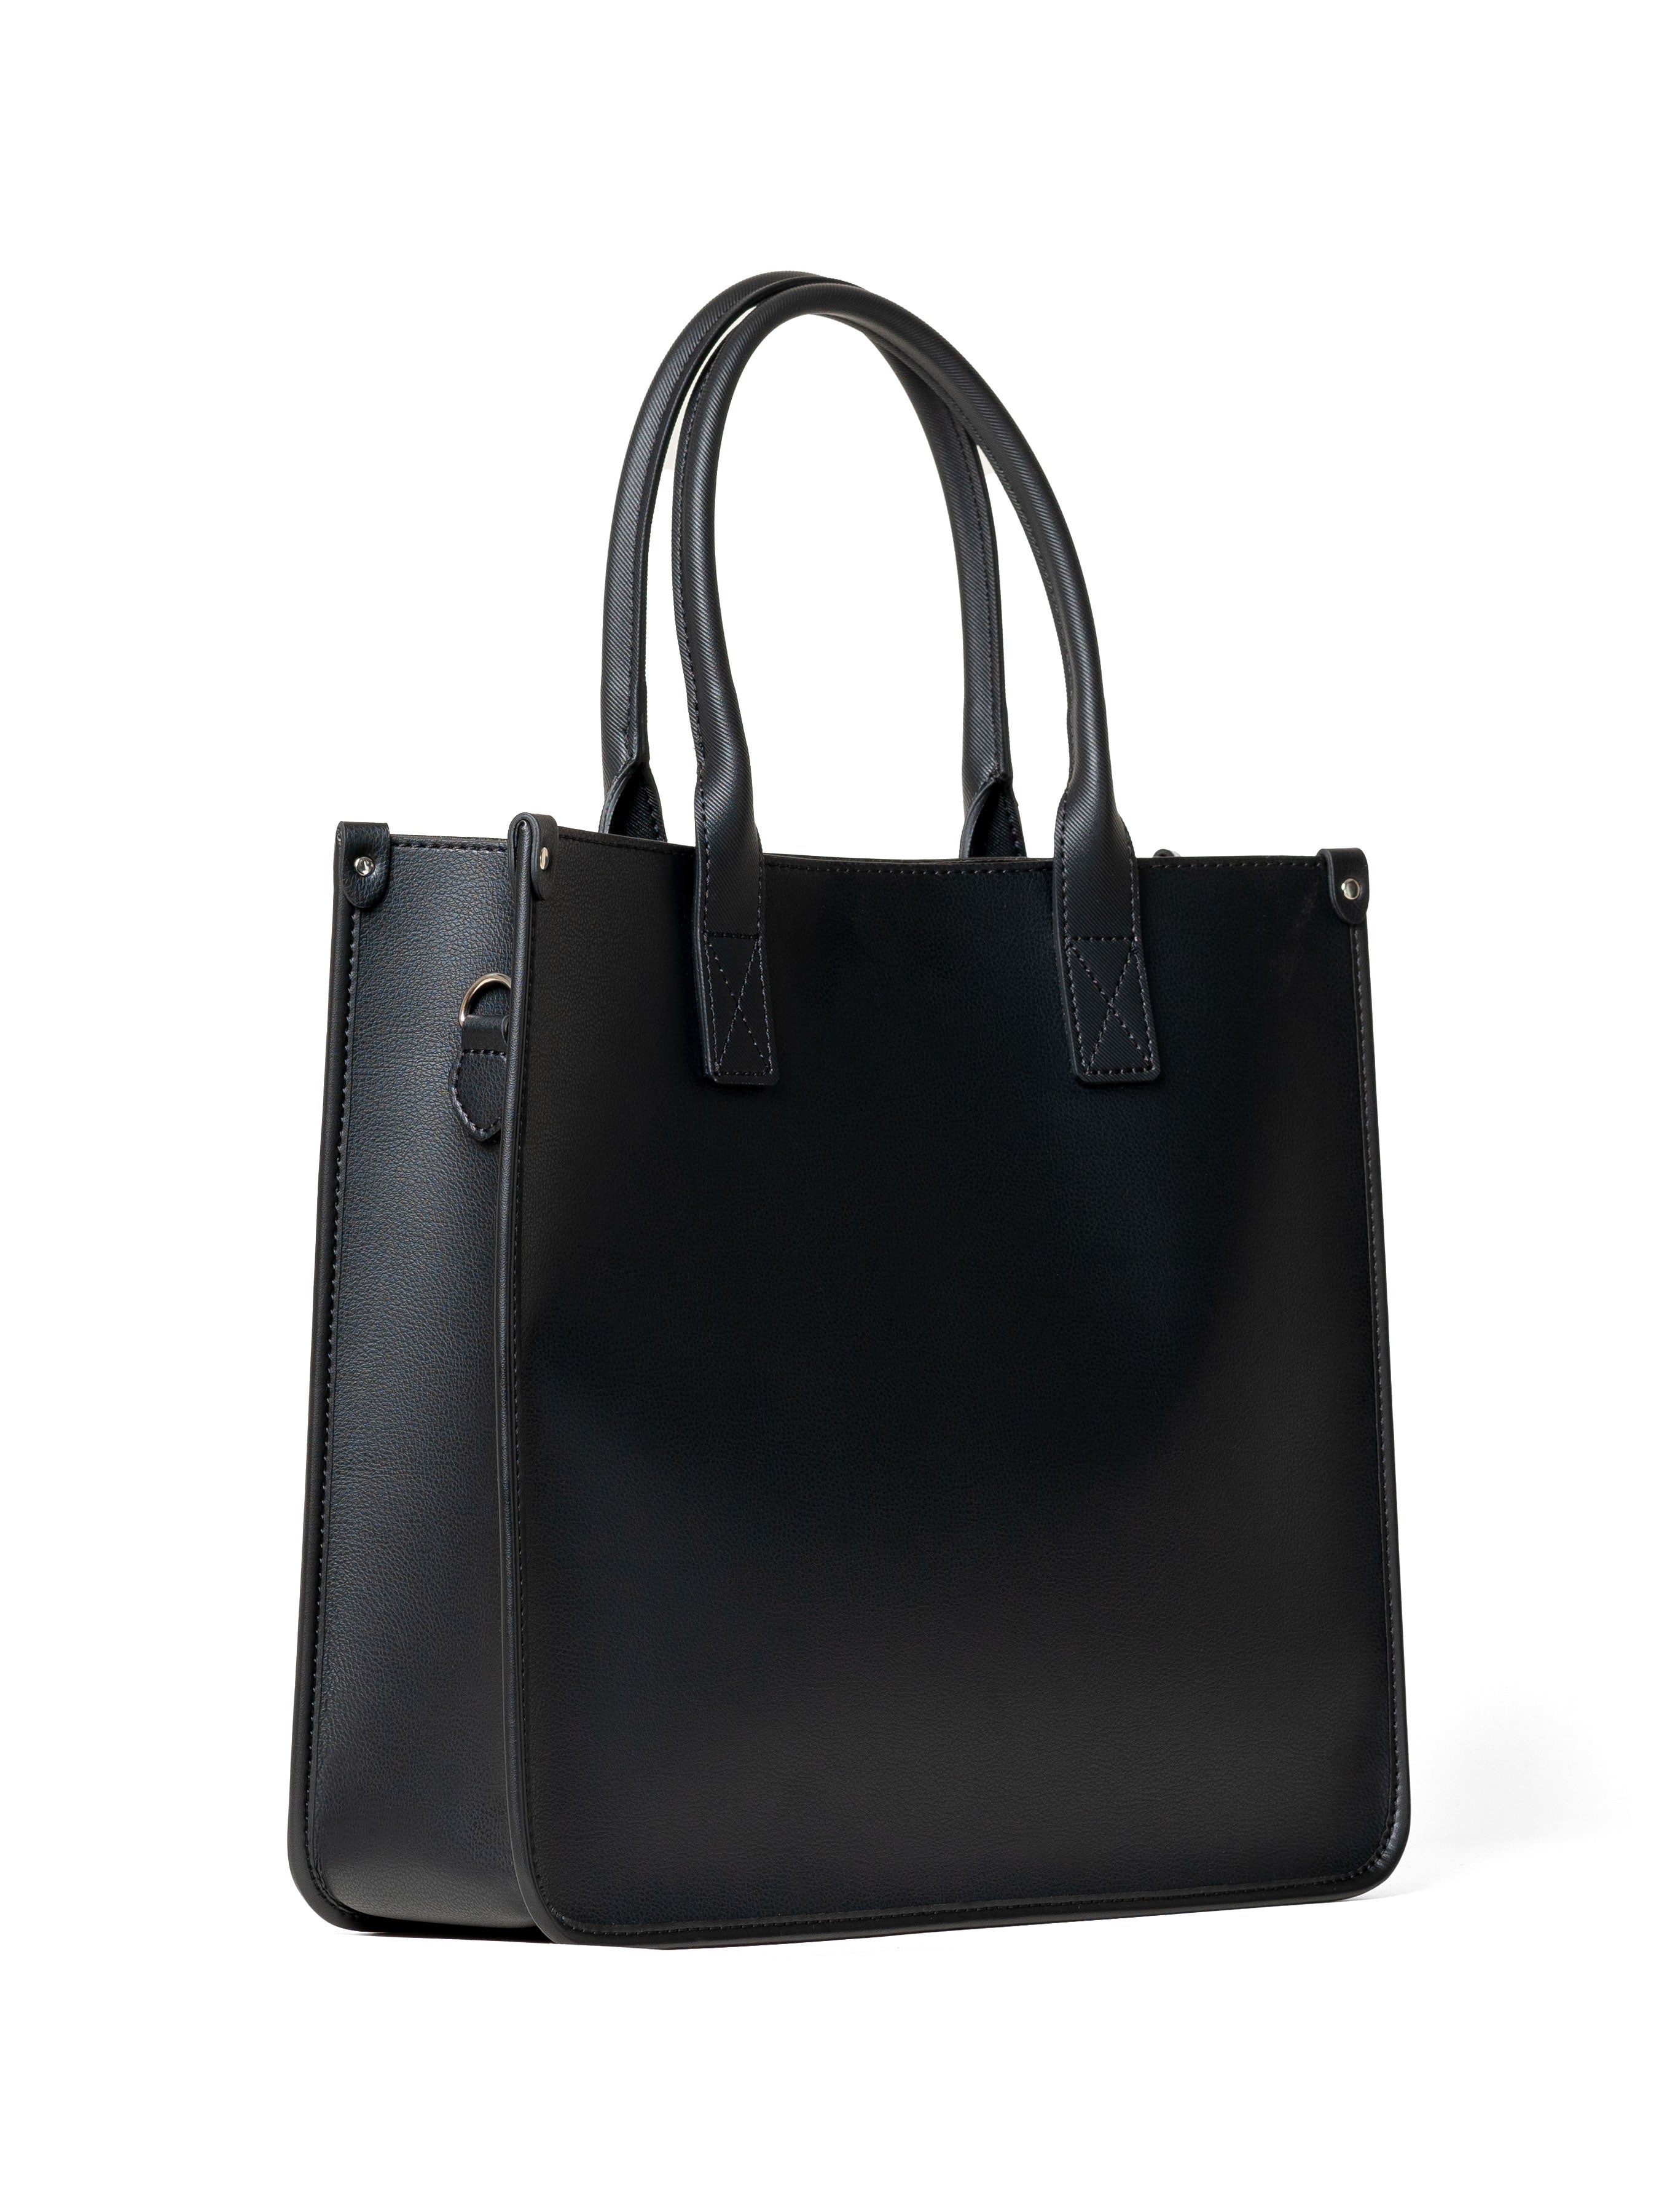 Ares Tote Bag - Black Stripe Textured - Zeve Shoes